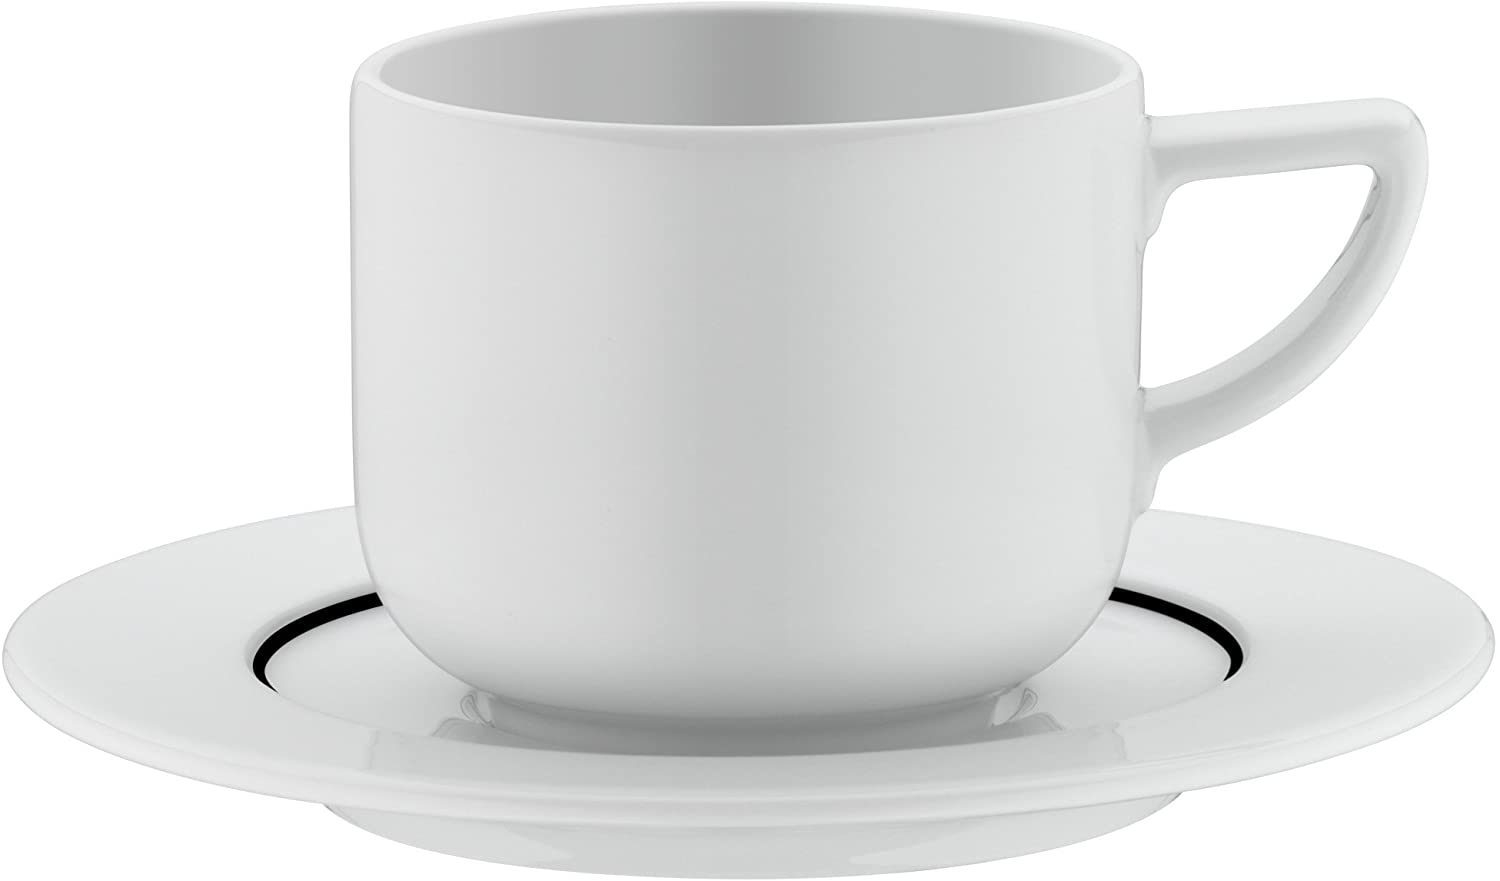 WMF Michalsky 650839440 Tea/Coffee Cup and Saucer